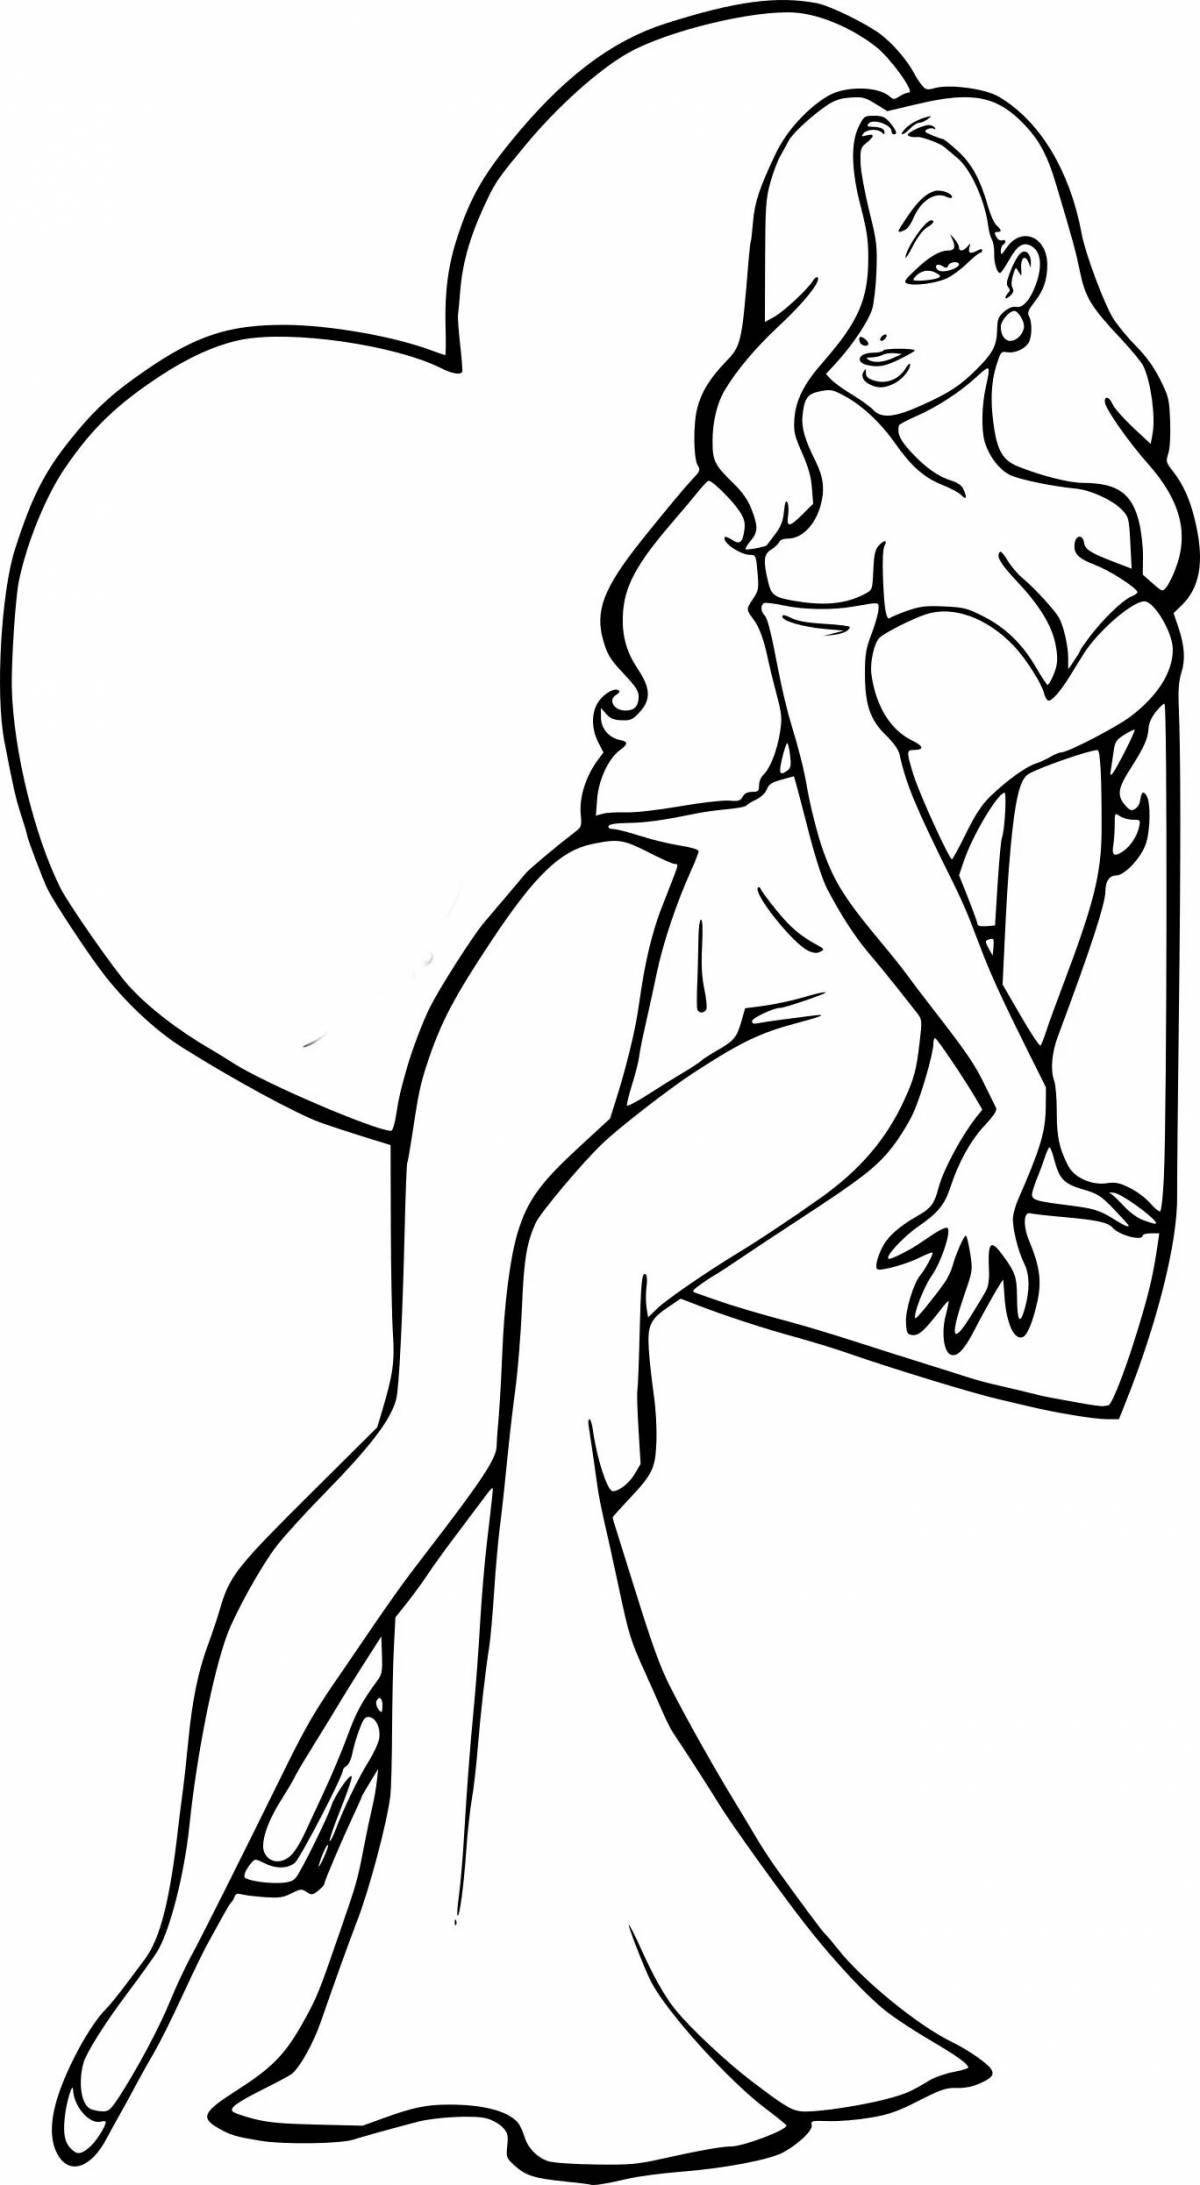 Mysterious nude girls coloring pages